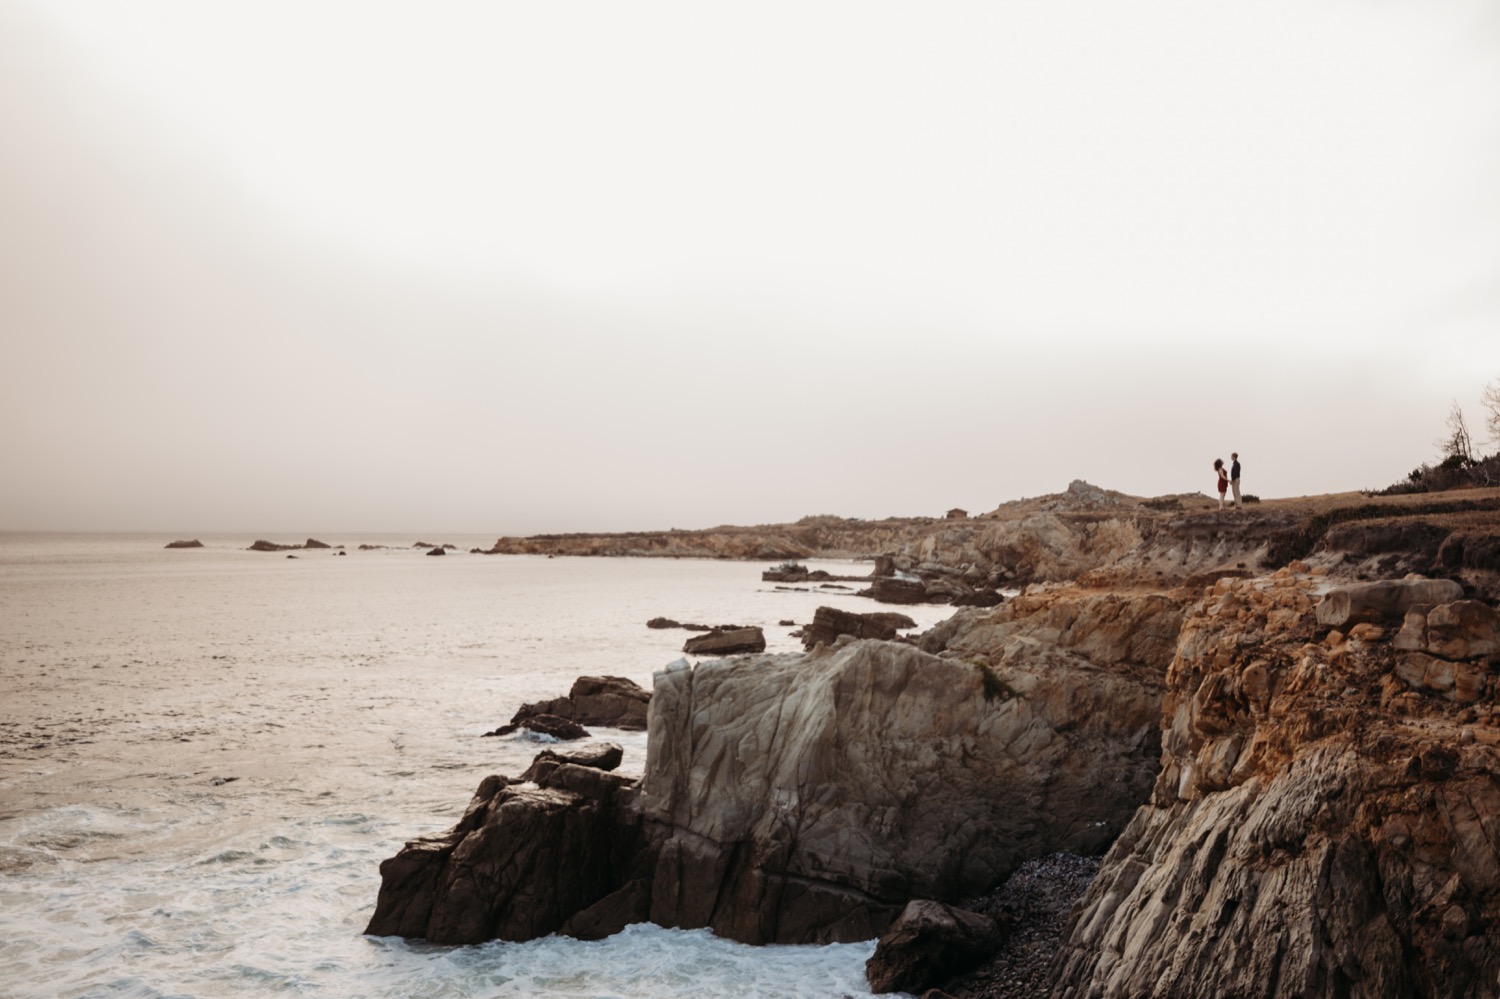 Dramatic image of couple on a rocky bluff overlooking the Pacific Ocean during their Salt Point Park engagement photoshoot.